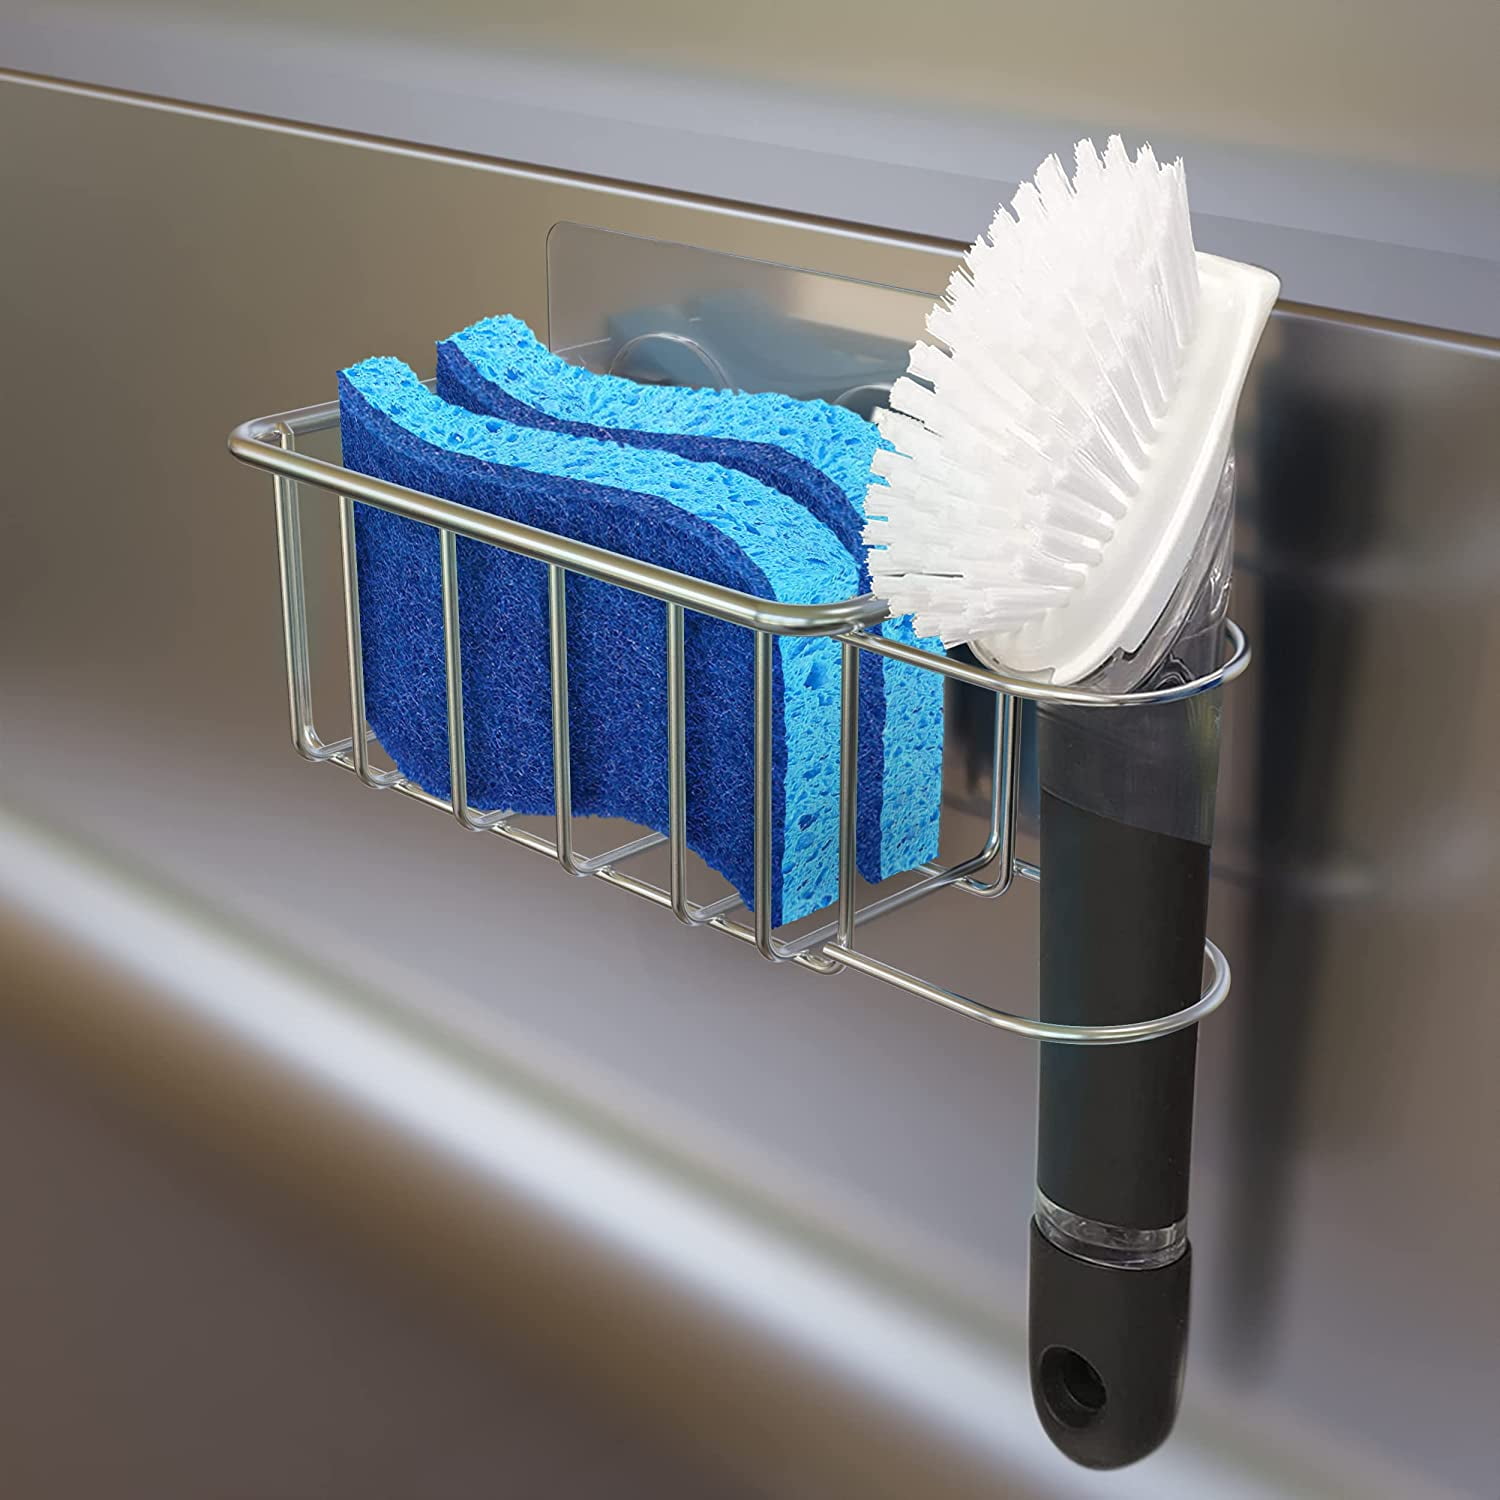 The Crown Choice Kitchen Sponge and Brush Holder – Sink Caddy - Sponge  Holder Stainless Steel, Adhesive, Rust Proof and Water Proof – Kitchen  Holder Sponges, Scrubbers, Soap 